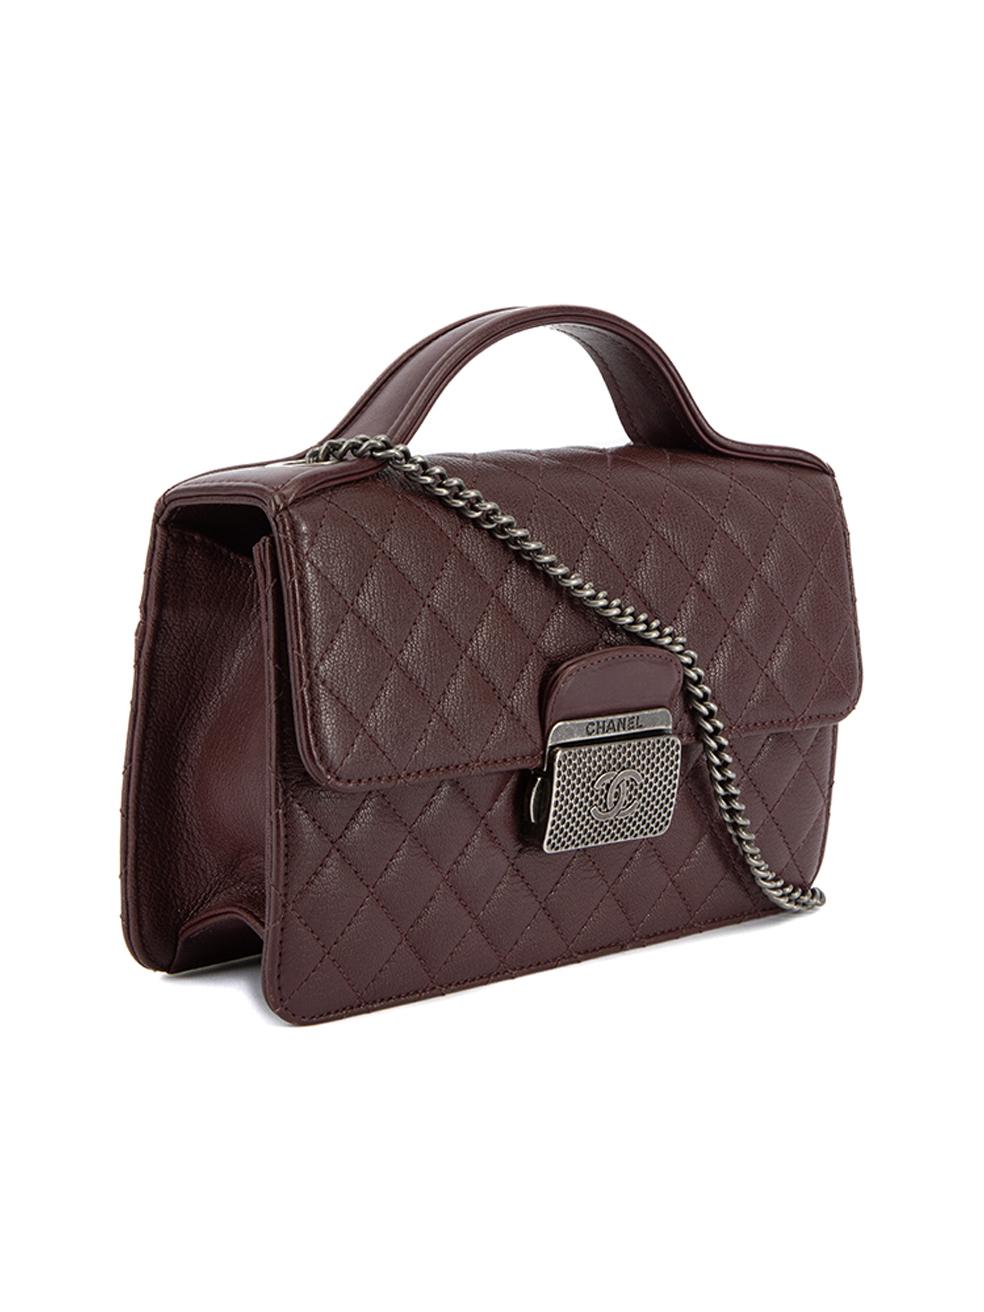 CONDITION is Very good. Minimal wear to bag is evident. Minimal wear the bag interior lining where marks and scuffs can be seen. There are some light scratches on hardware on this used Chanel designer resale item. This item comes with authentication